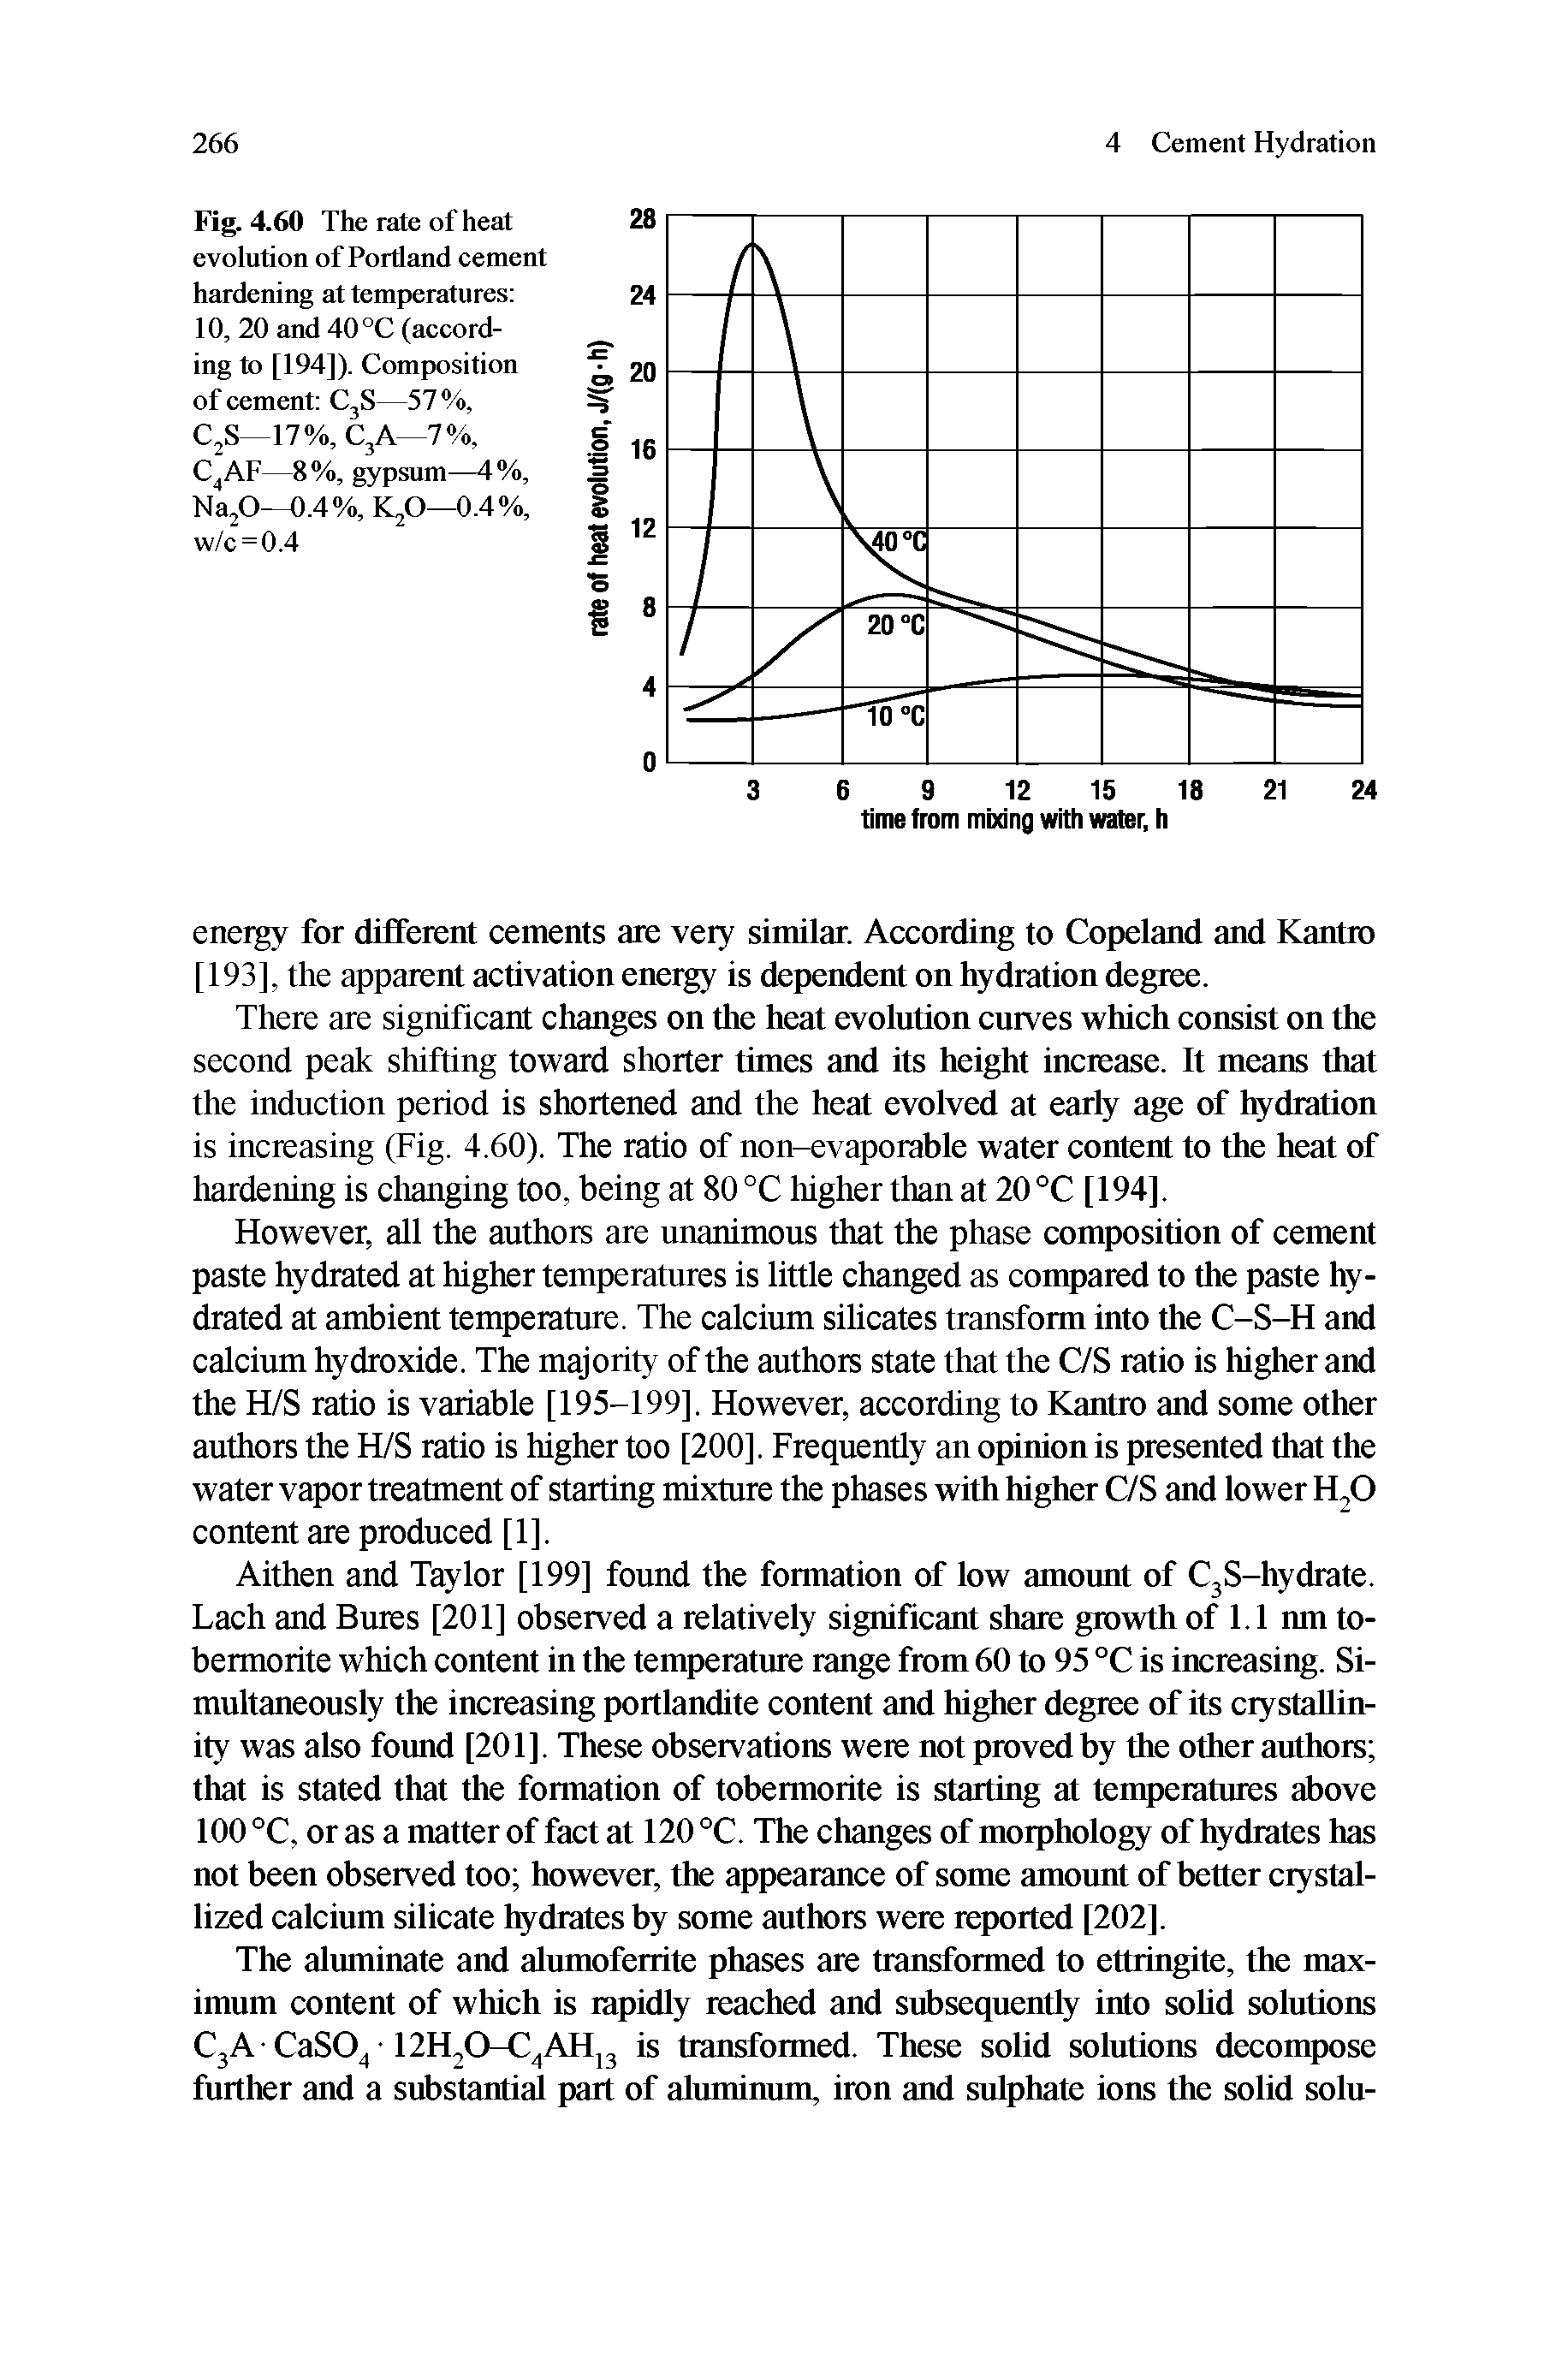 Fig. 4.60 The rate of heat evolution of Portland cement hardening at temperatures 10, 20 and 40 °C (according to [194]). Composition of cement CjS—57 %, CjS 17%, C3A—7%,...